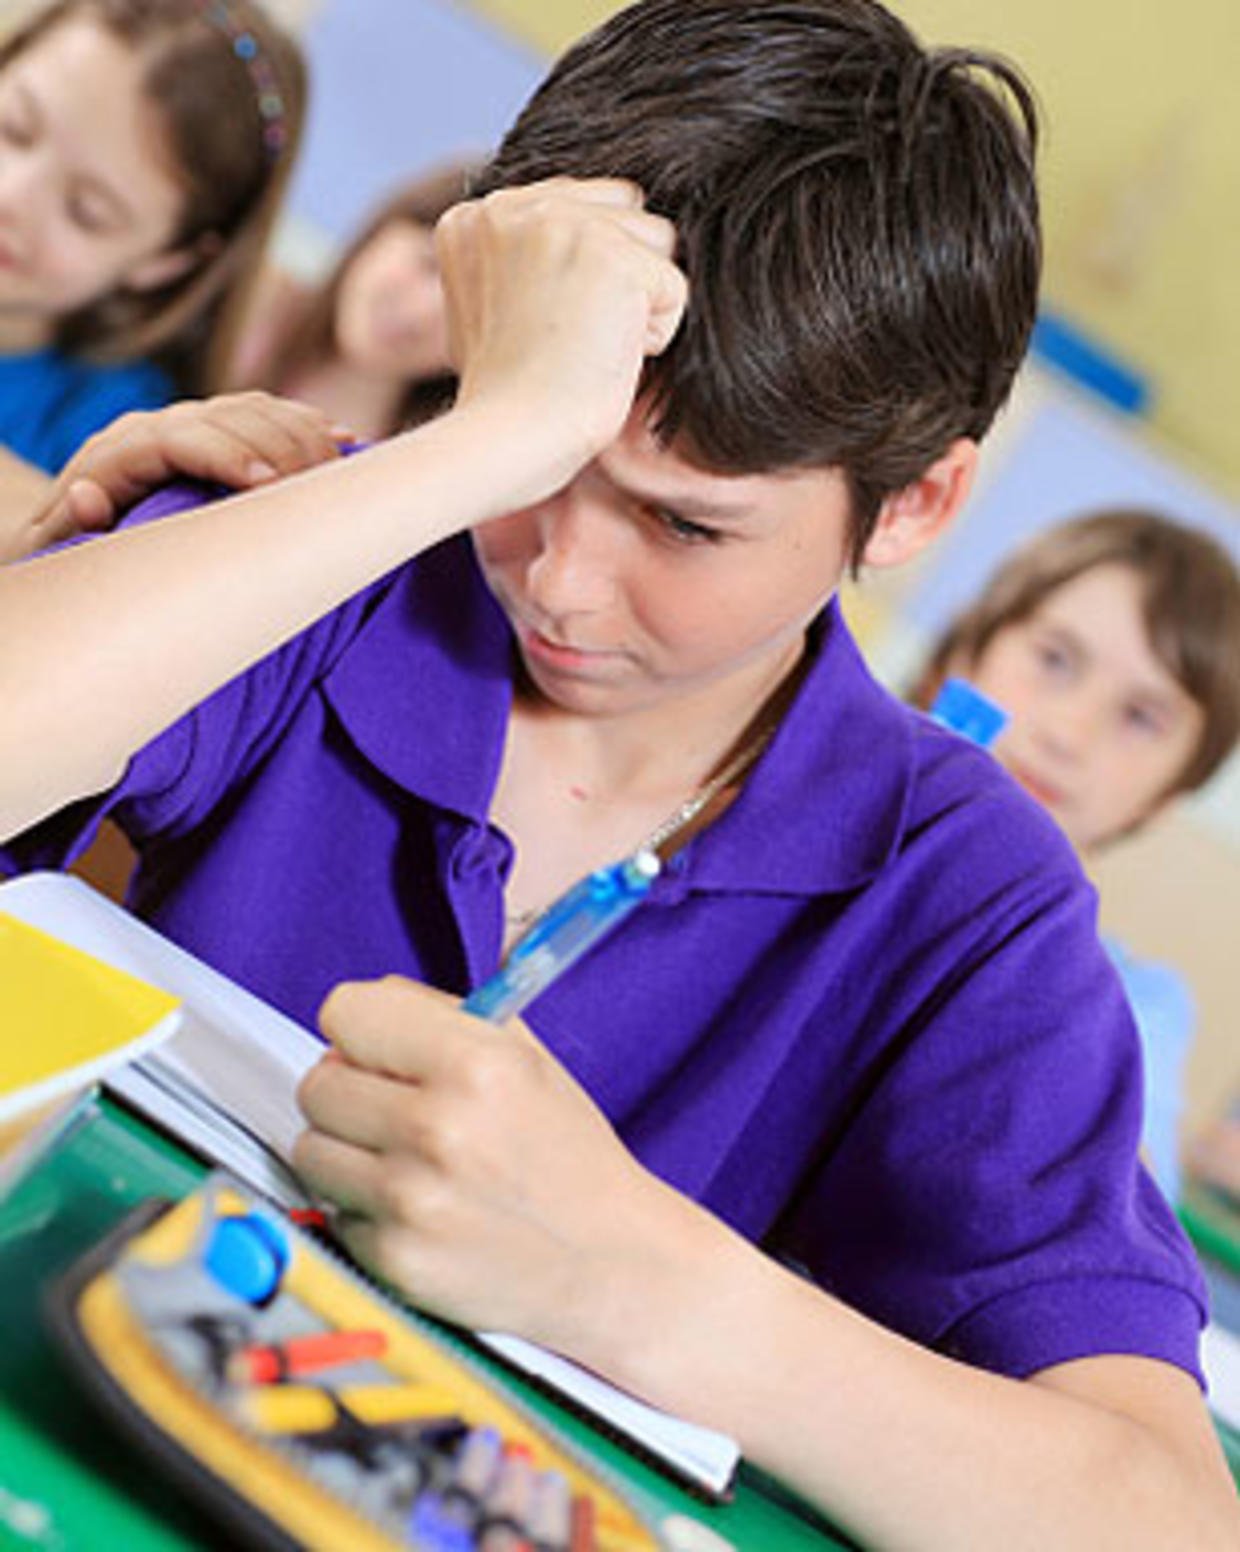 Does your child really have ADHD? 17 things to rule out ...